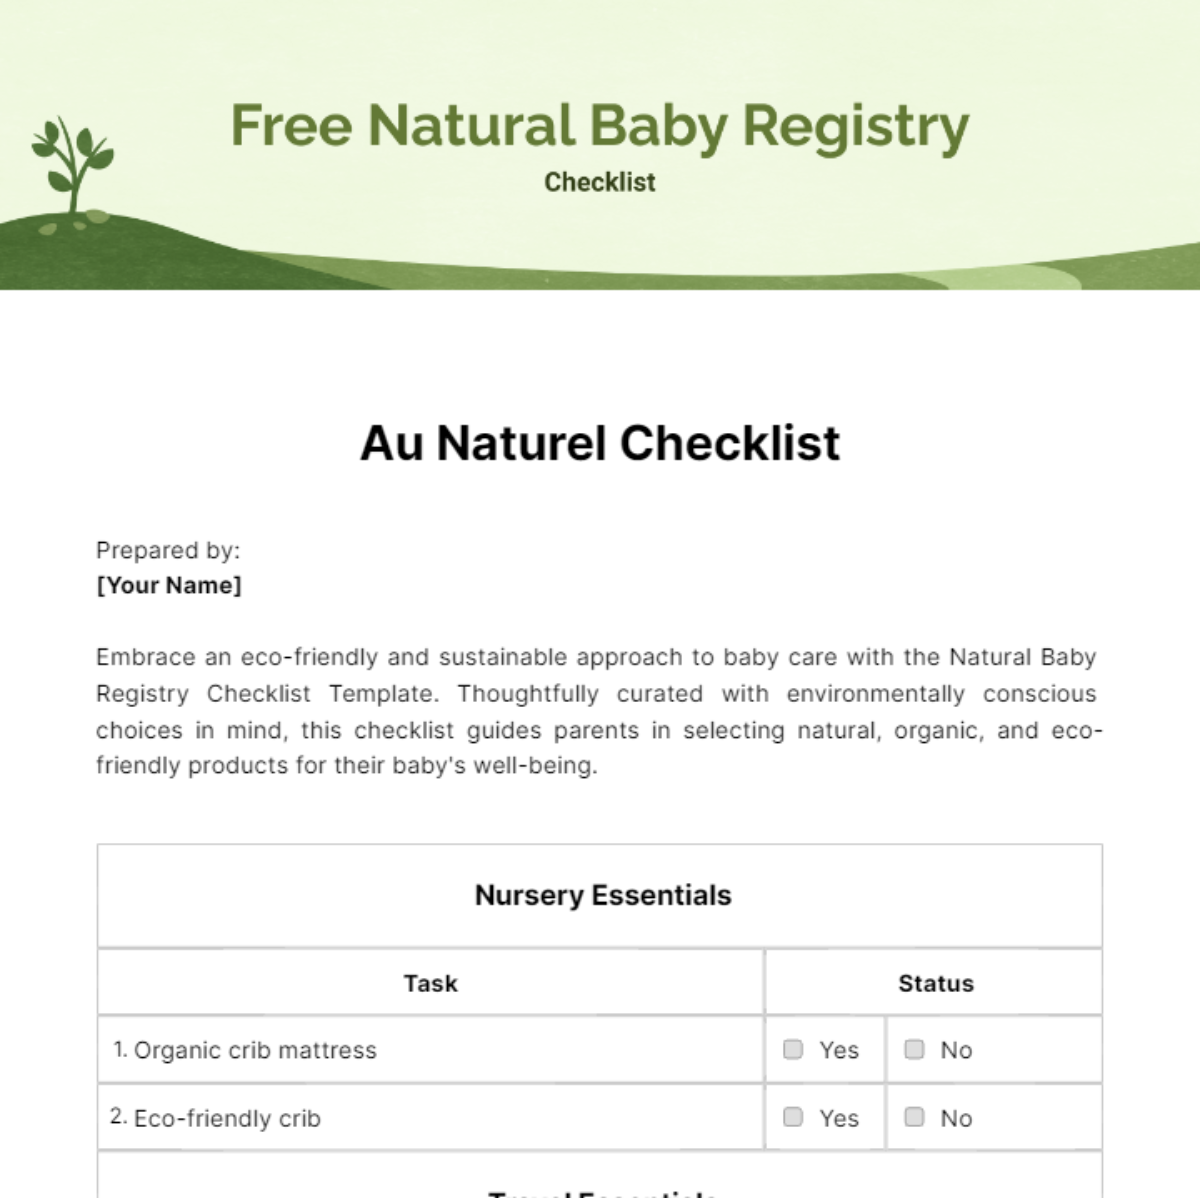 Free Natural Baby Registry Checklist Template